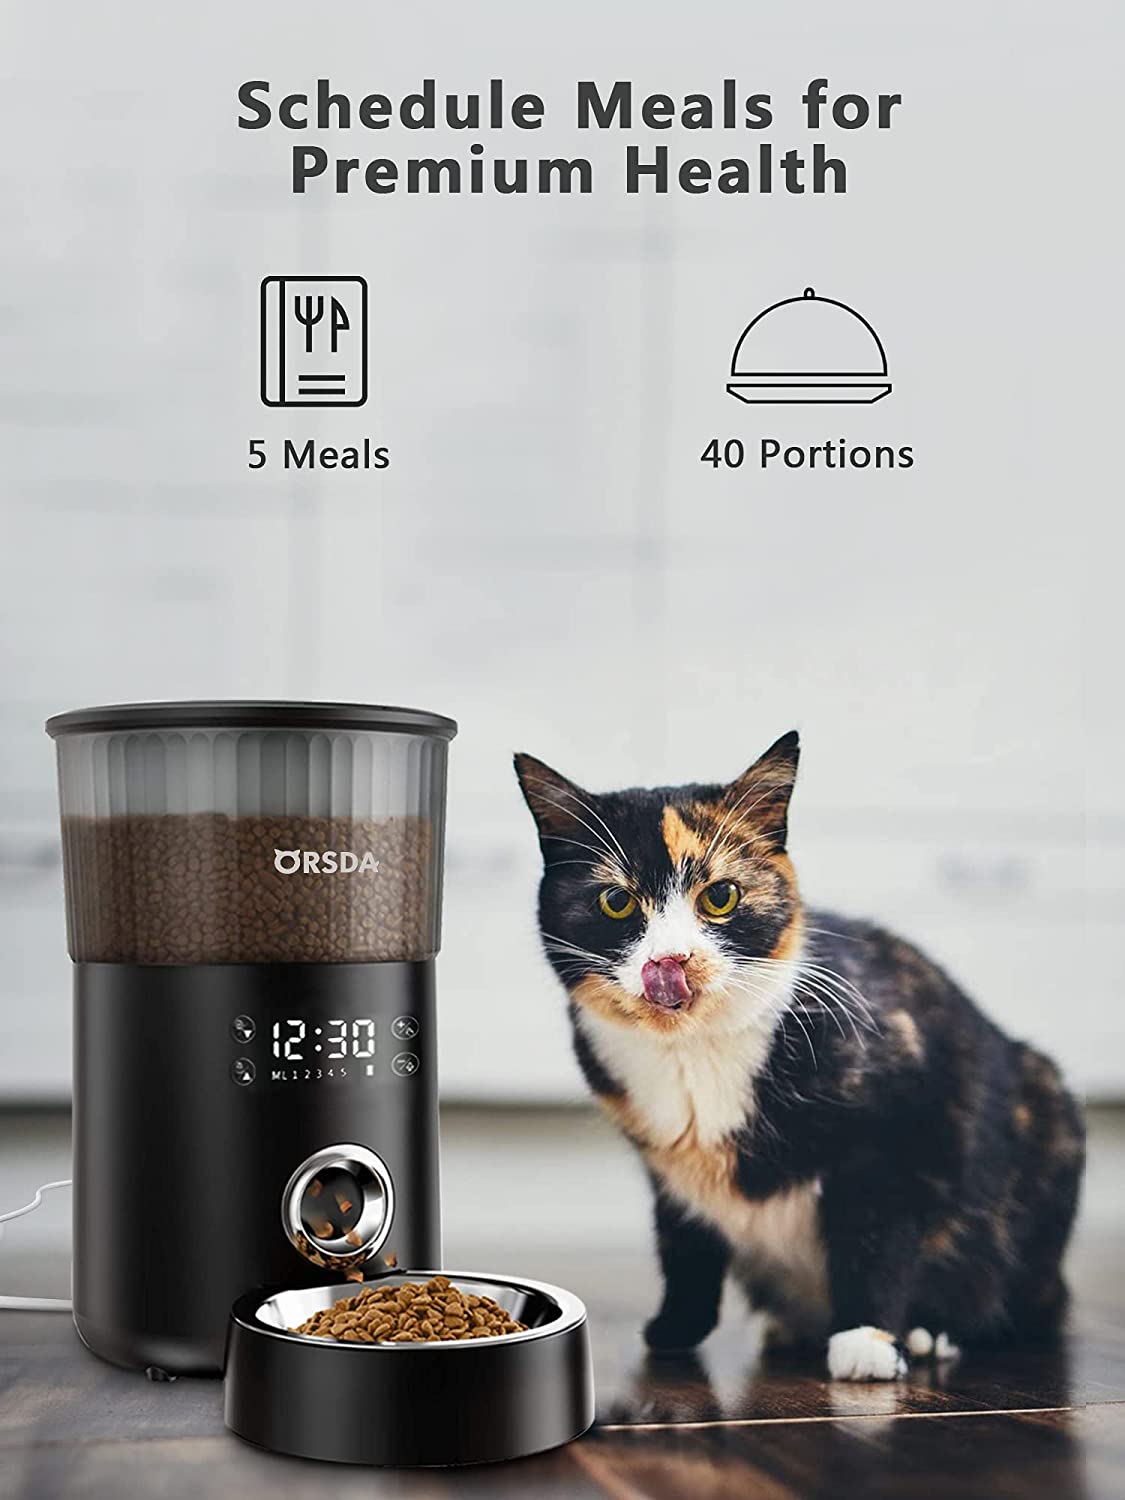 ORSDA Automatic Cat Feeder， 135oz/4L Dog Feeder Pet Food Dispenser with Programmable Timer， Portion Control 1-5 Meals Per Day， Dual Power Supply and Voice Recorder for Small to Medium Cats Dogs (Black)